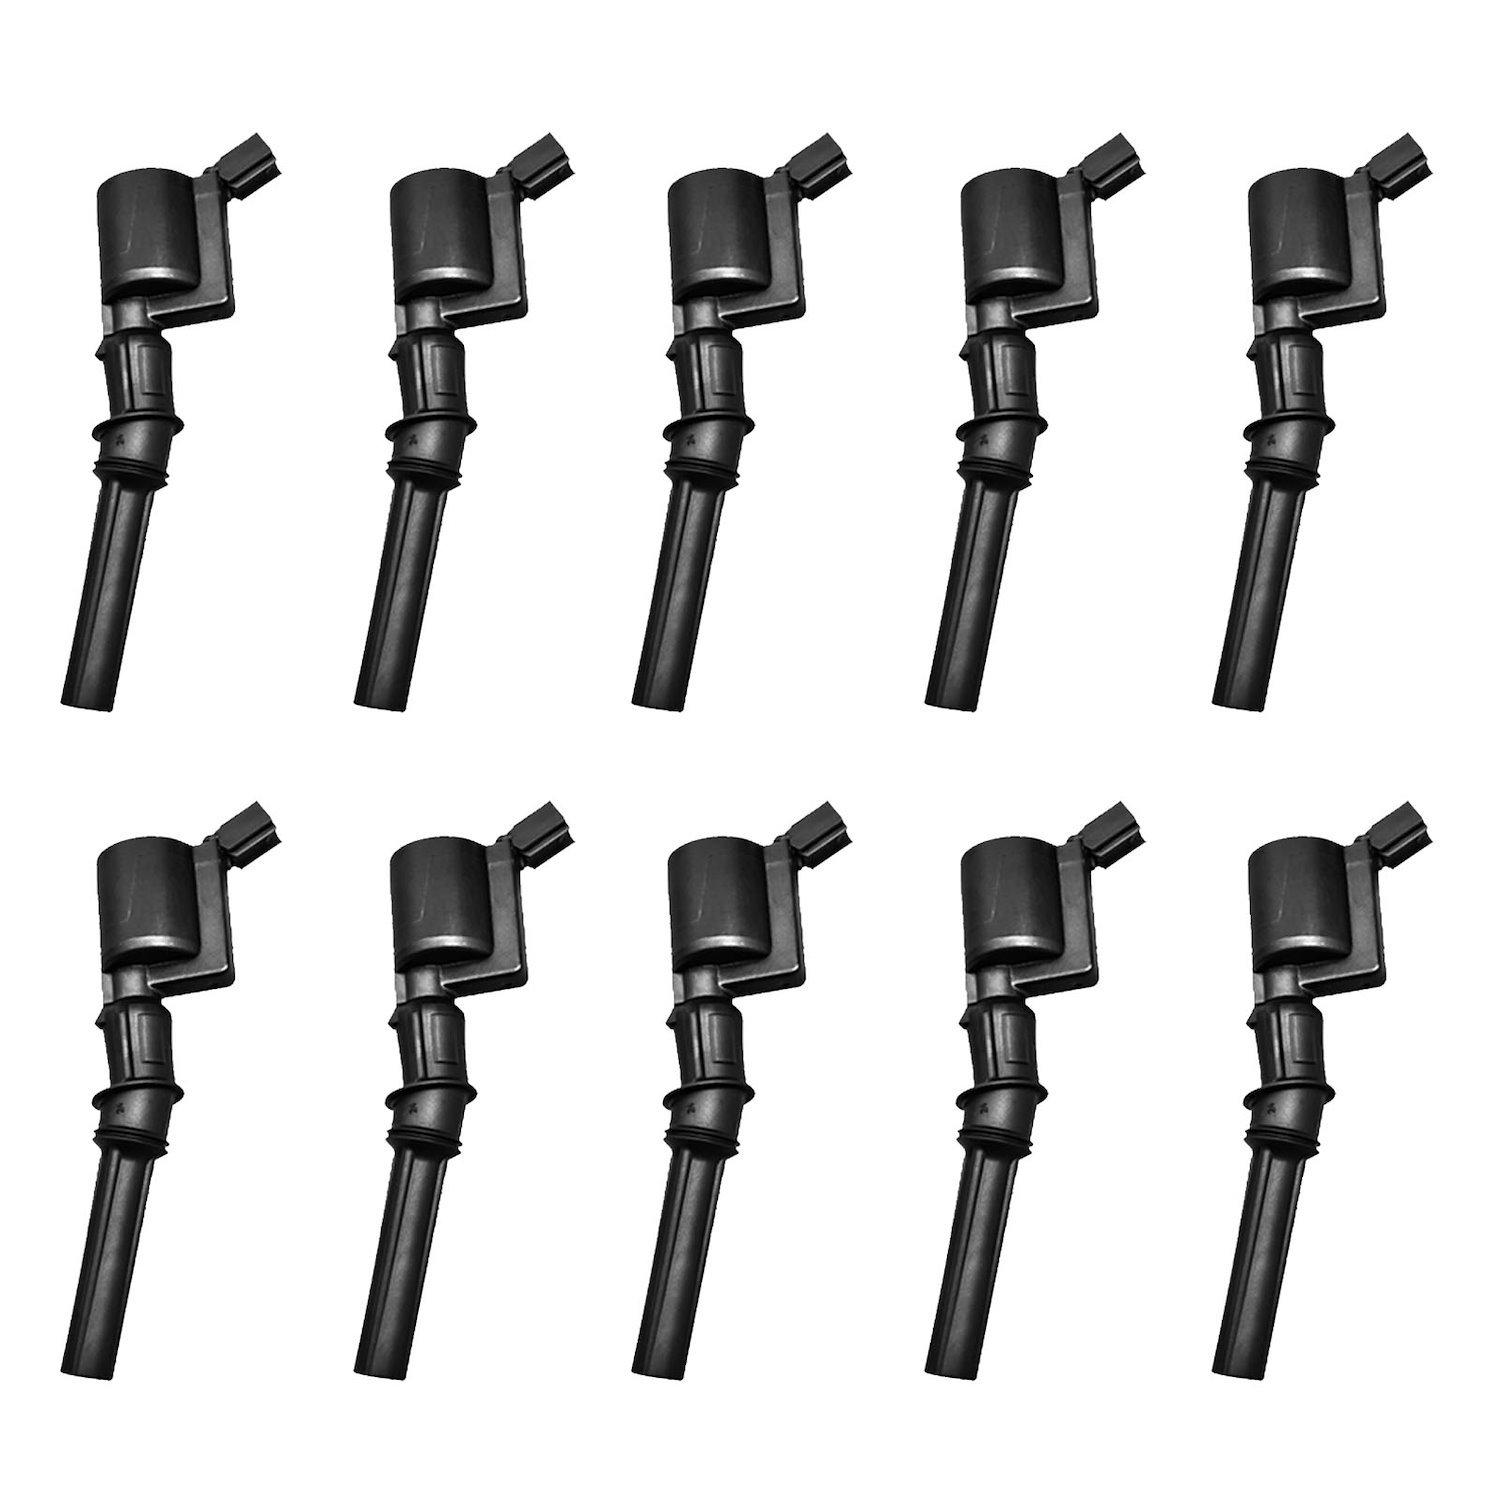 OE Replacement Ignition Coils for 1998-2008 Ford F-150/E-150/Expedition